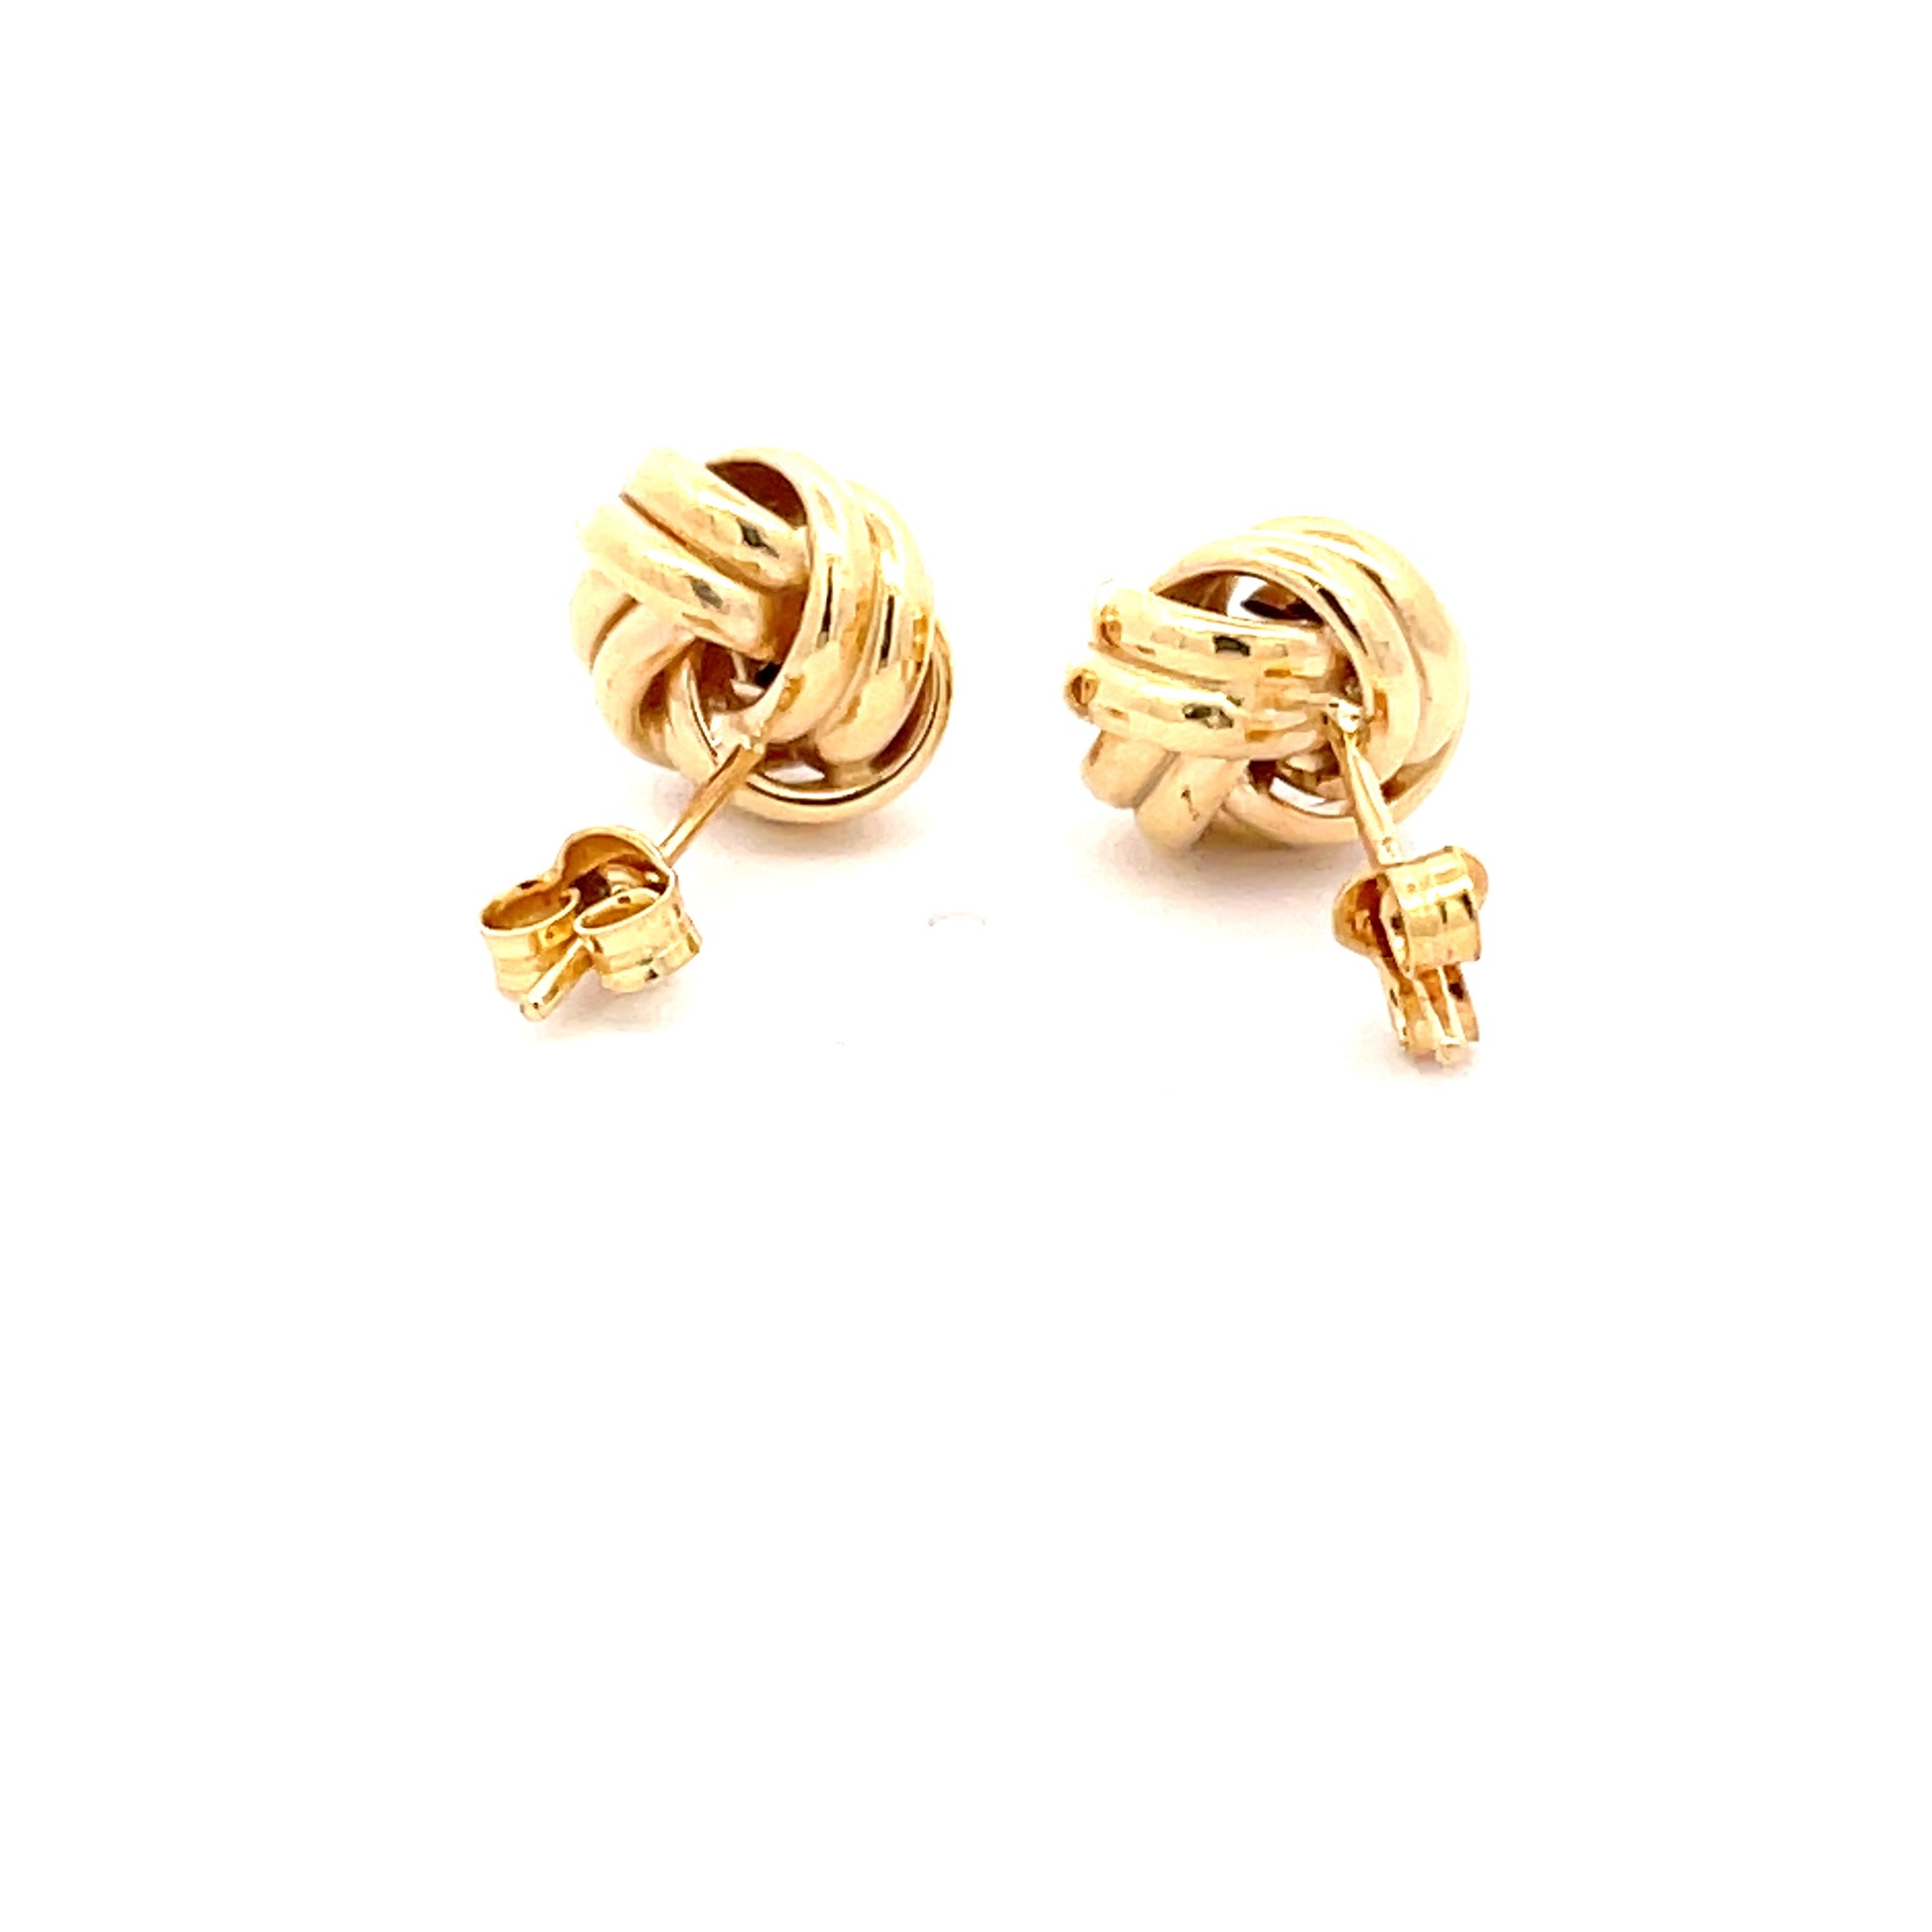 Yellow Gold Knot Earring  Gardiner Brothers   